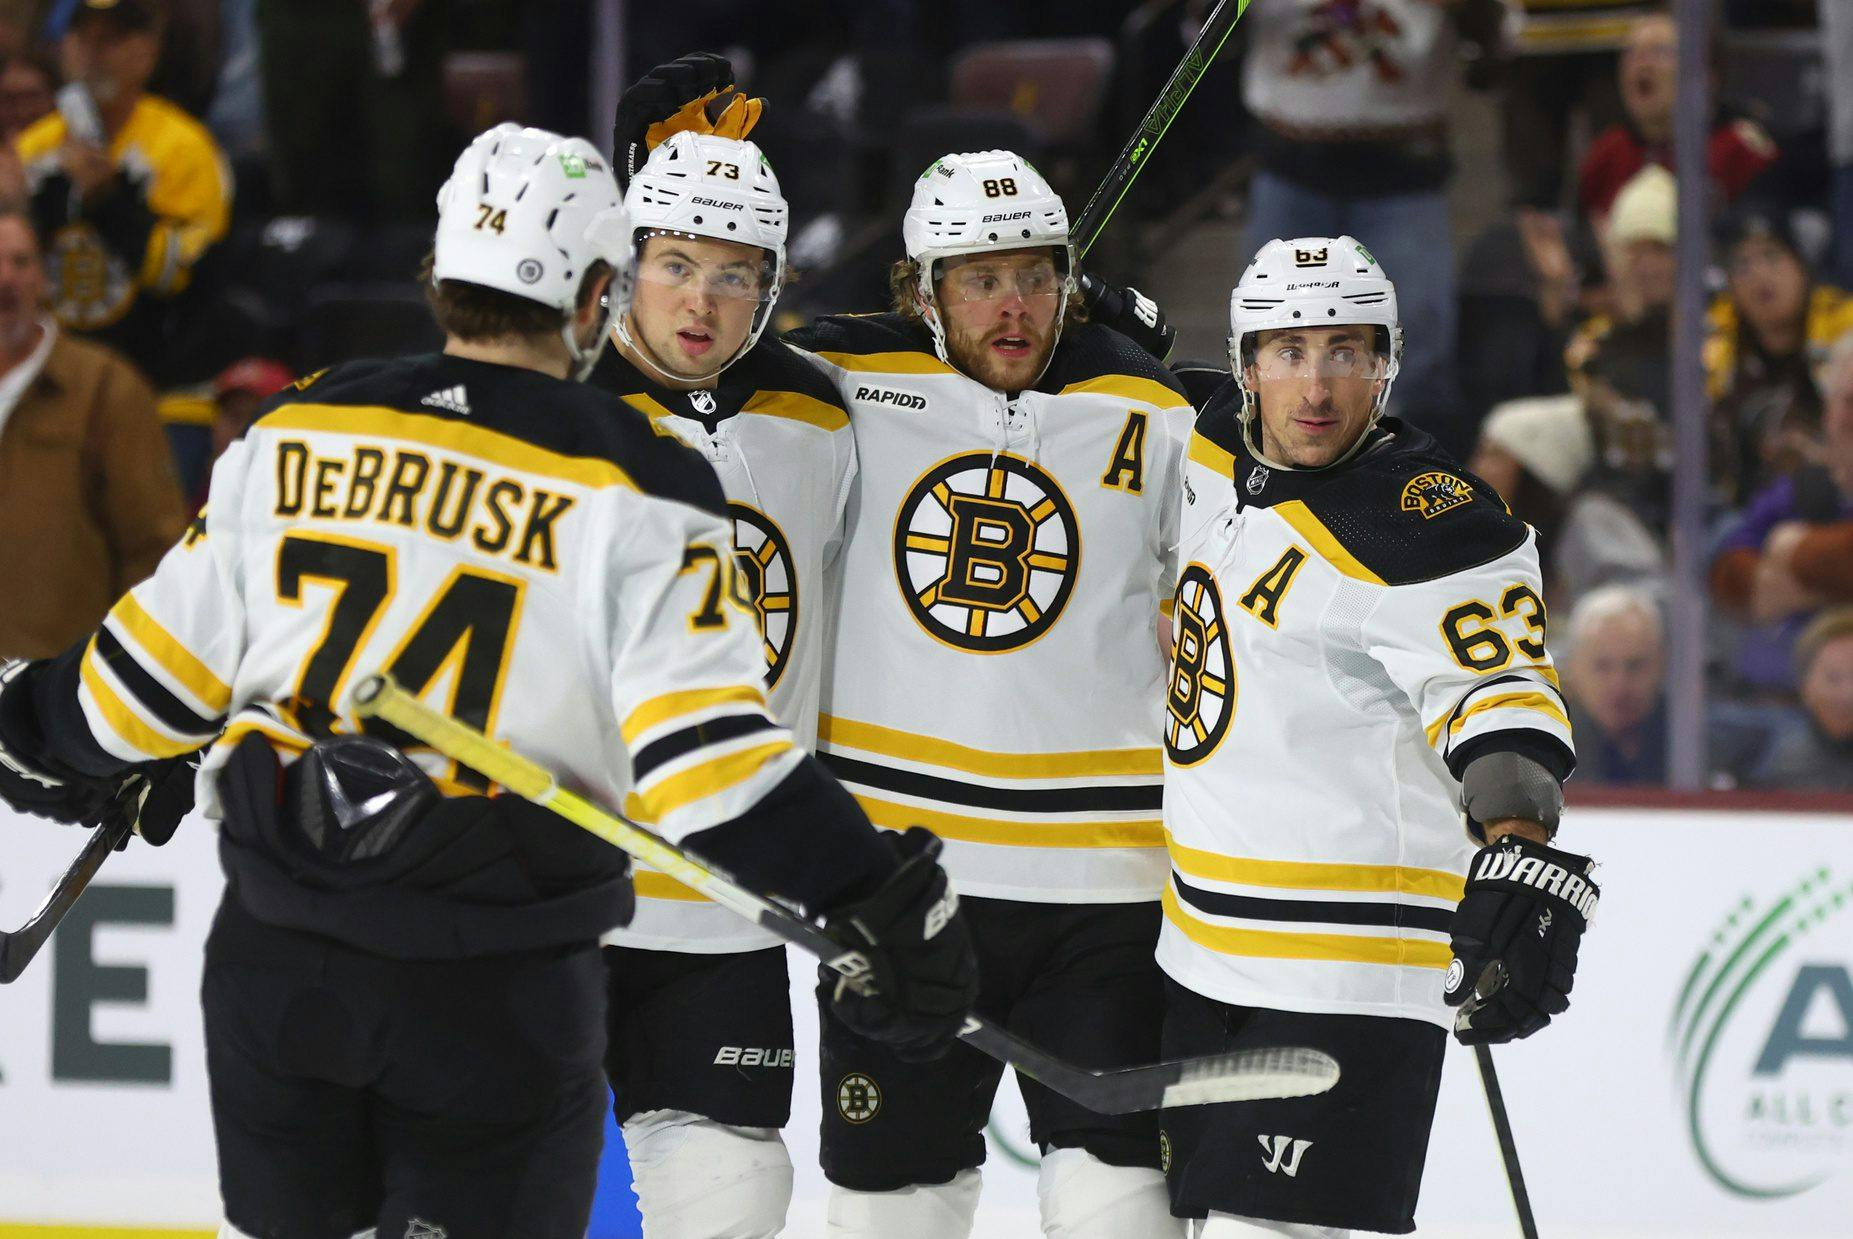 Bruins are first team in NHL history to achieve this impressive